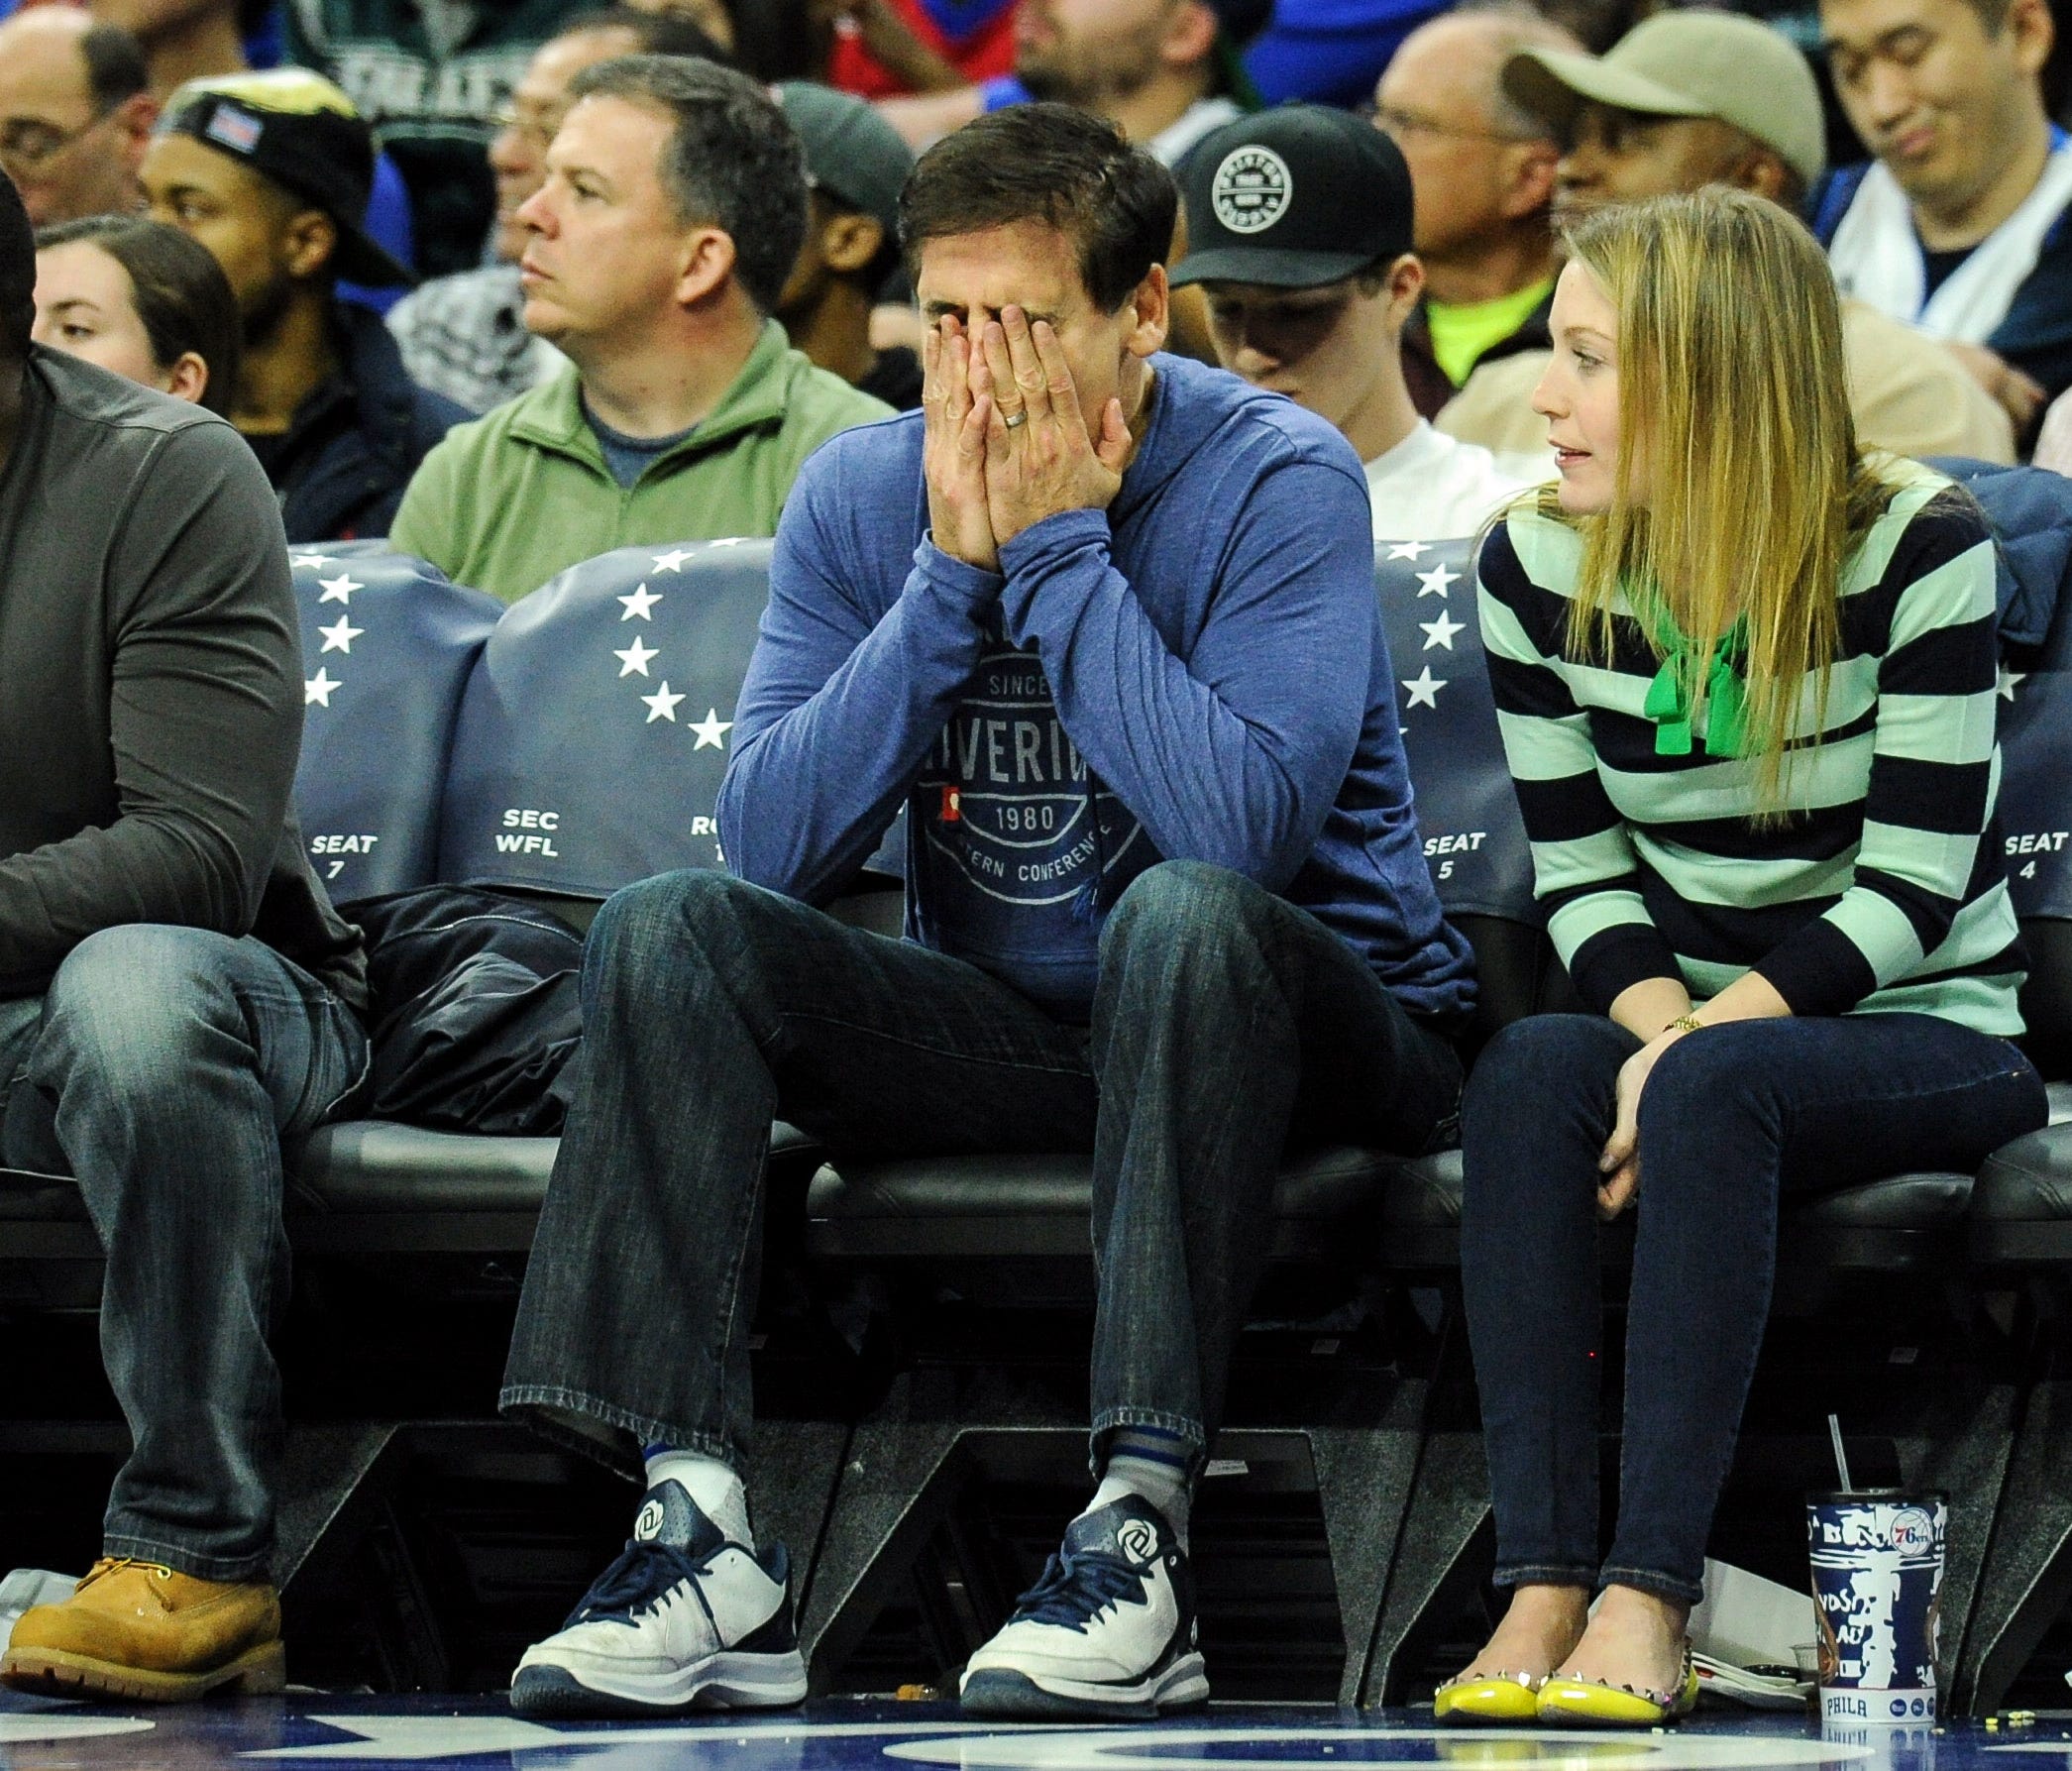 Mar 17, 2017; Philadelphia, PA, USA; Dallas Mavericks owner Mark Cuban reacts to a turnover during the third quarter of the game against the Philadelphia 76ers at the Wells Fargo Center. The Philadelphia 76ers won the game 116-74. Mandatory Credit: J